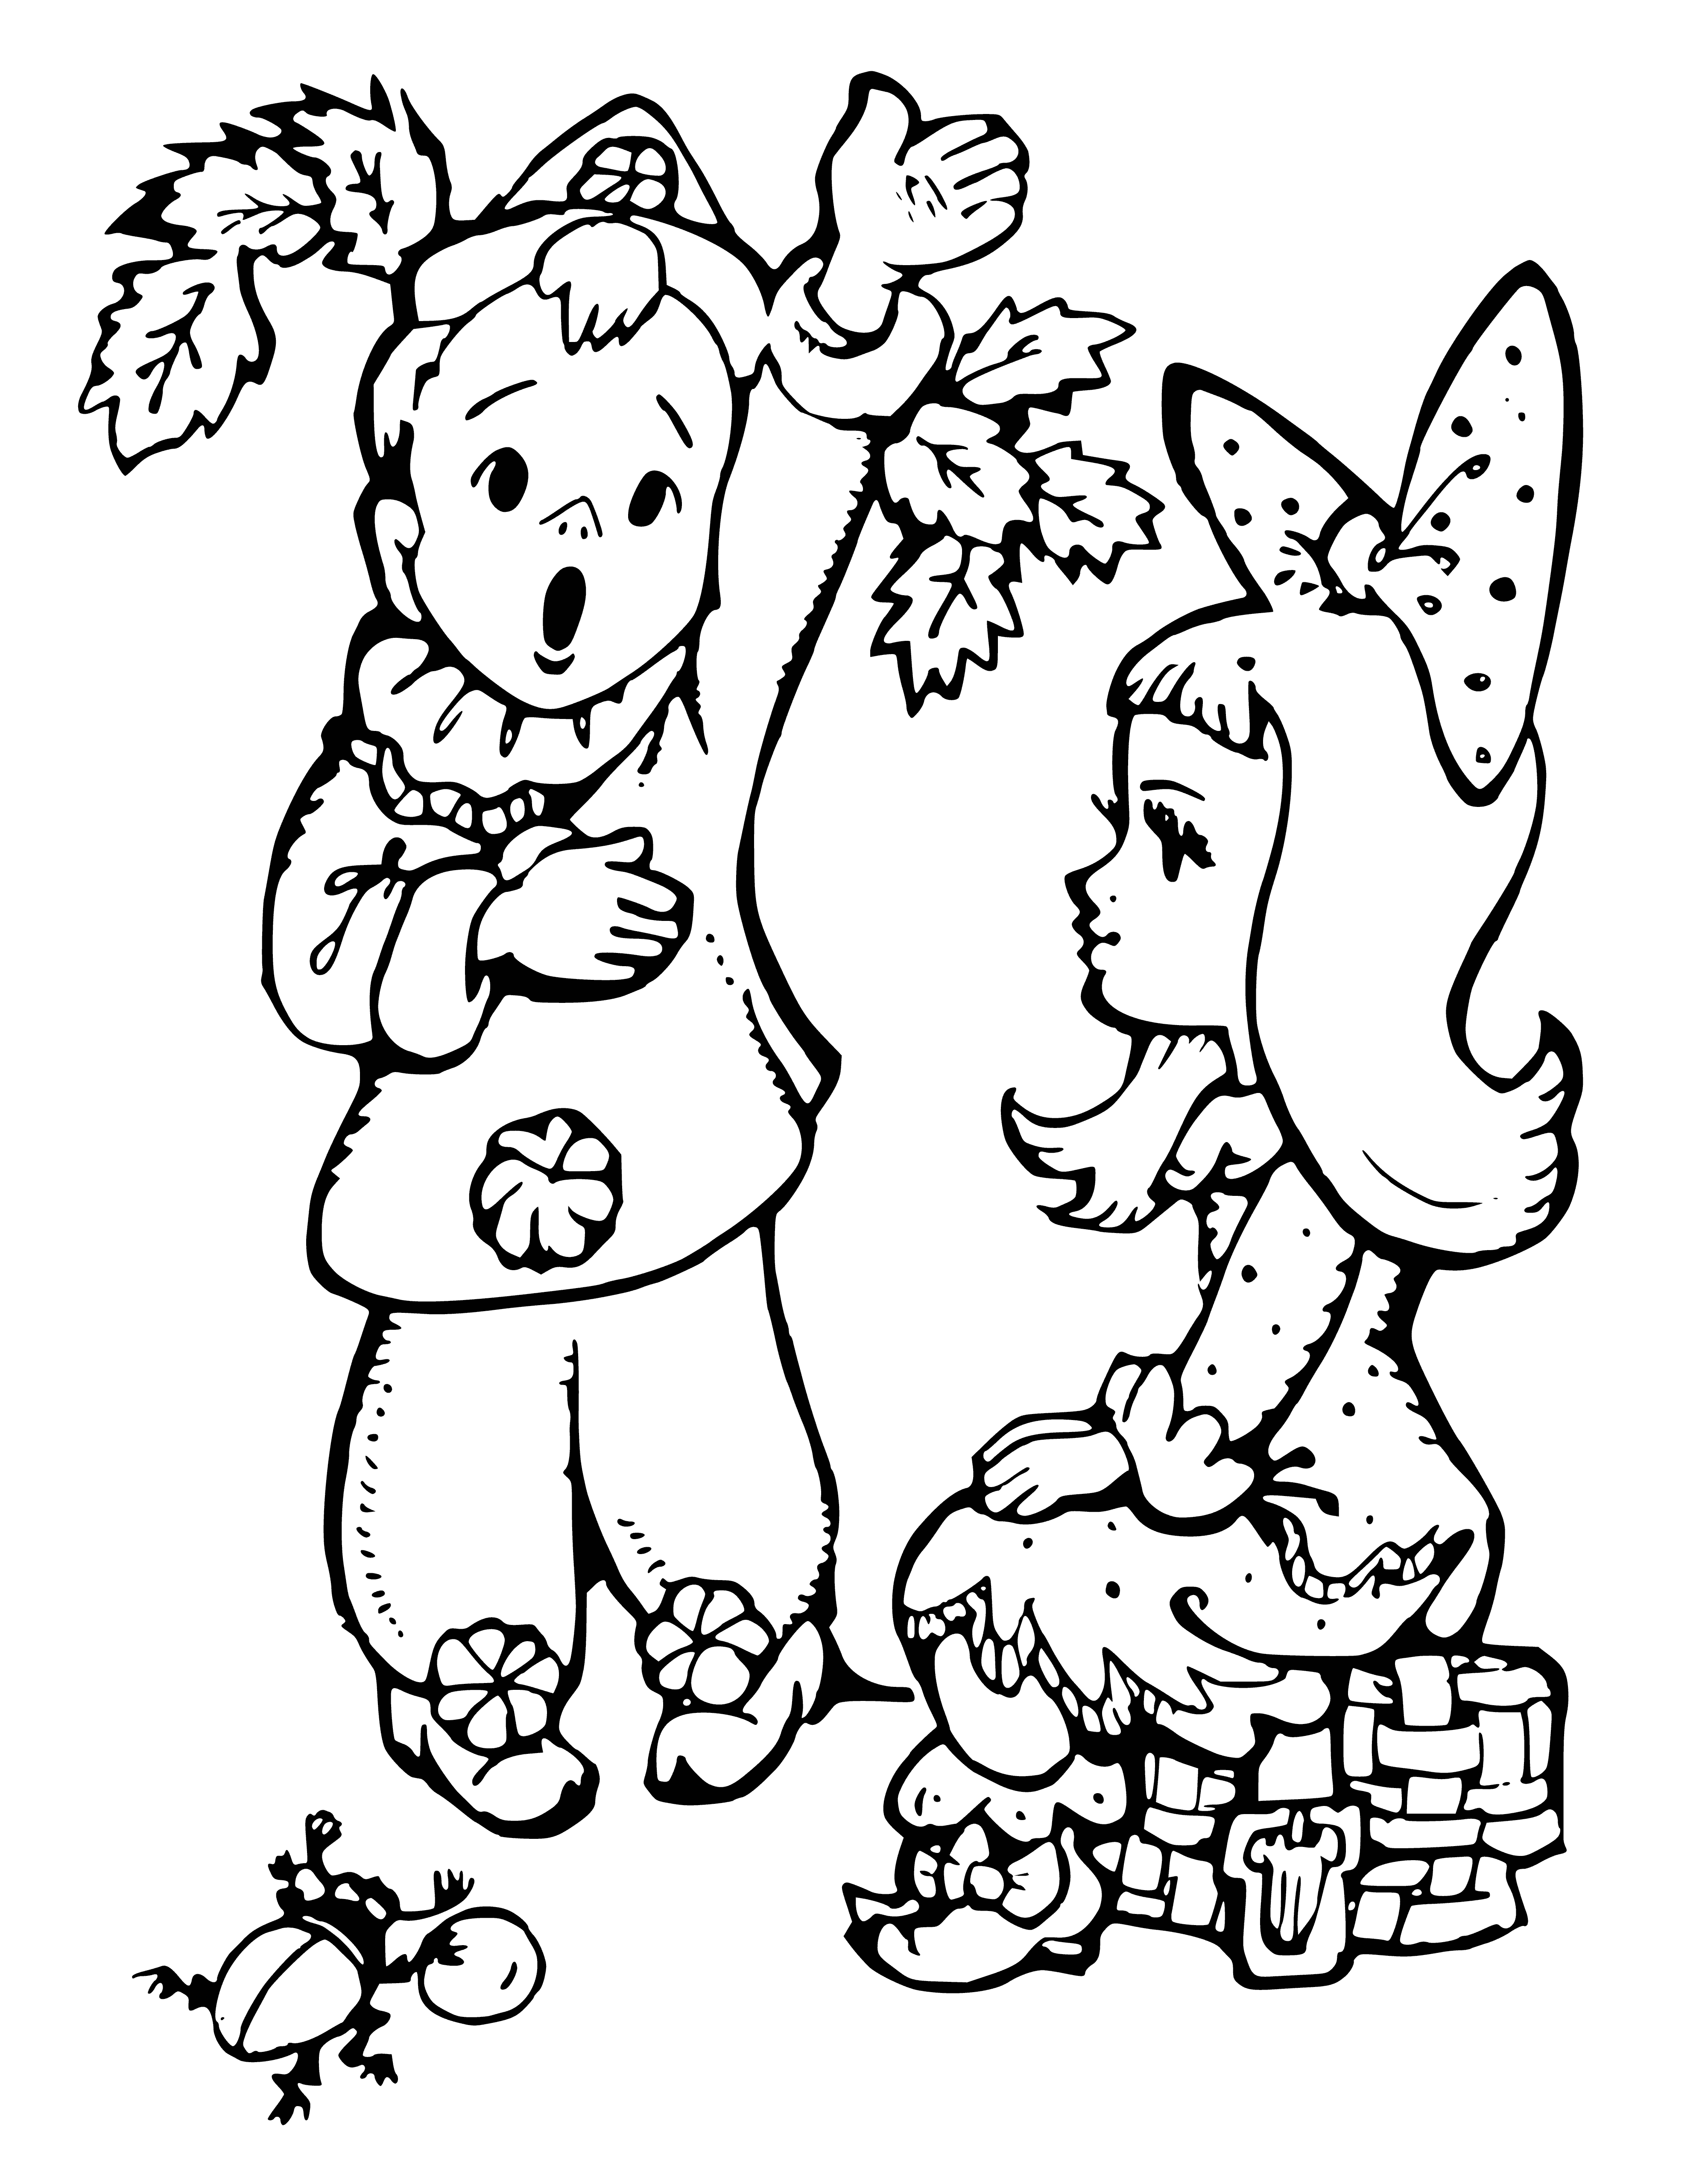 coloring page: Pierrot & Malvina, two kids with blonde hair & blue eyes, stand next to a big tree. Each wears different attire & has a small black nose & big black mouth.